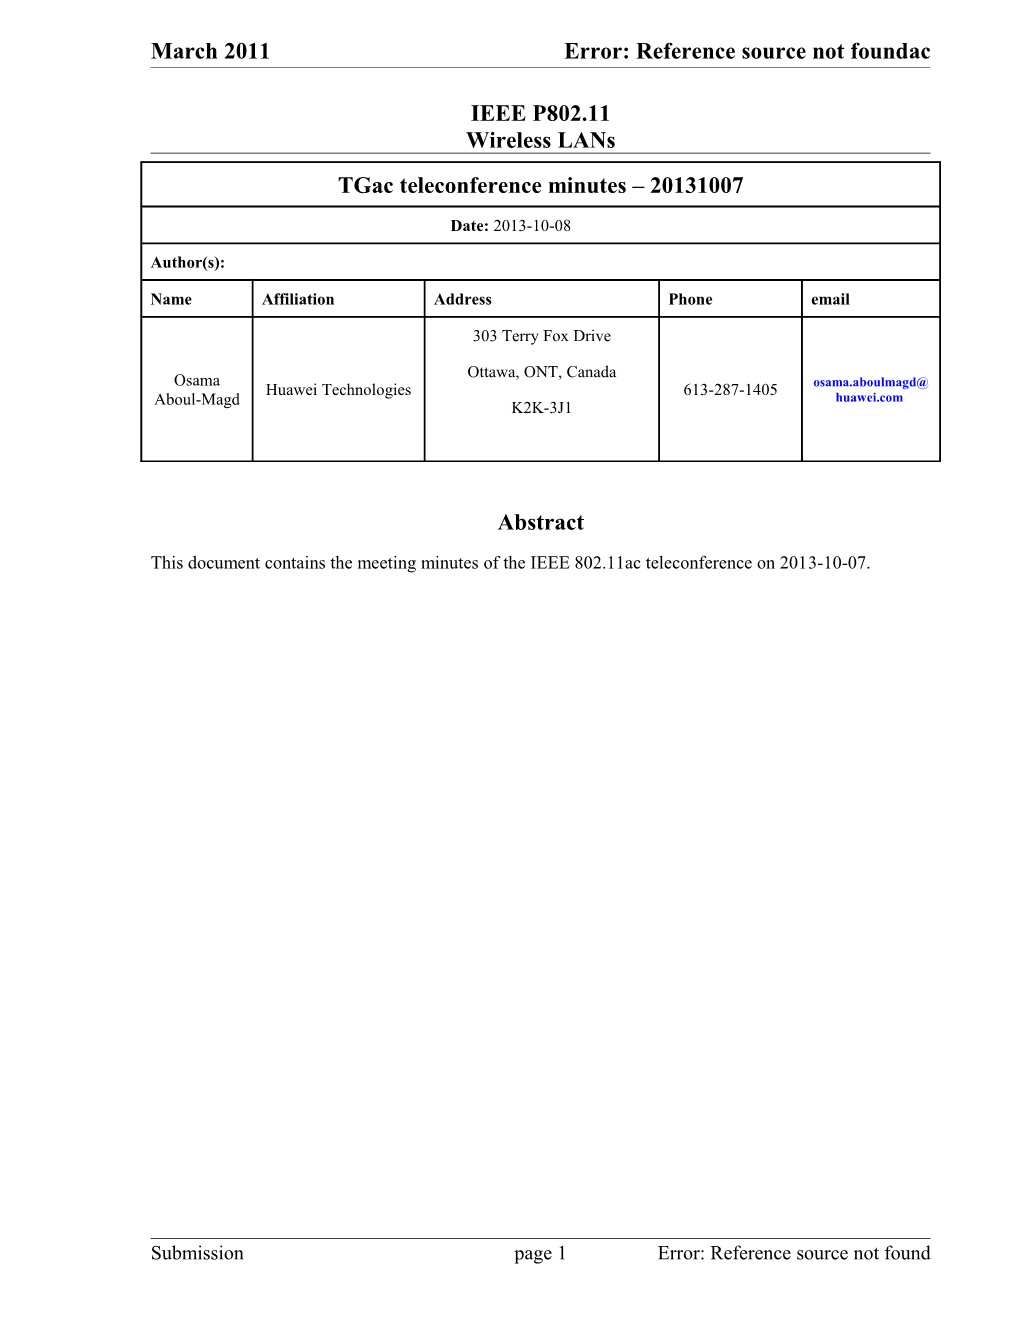 This Document Contains the Meeting Minutes of the IEEE 802.11Ac Teleconference on 2013-10-07